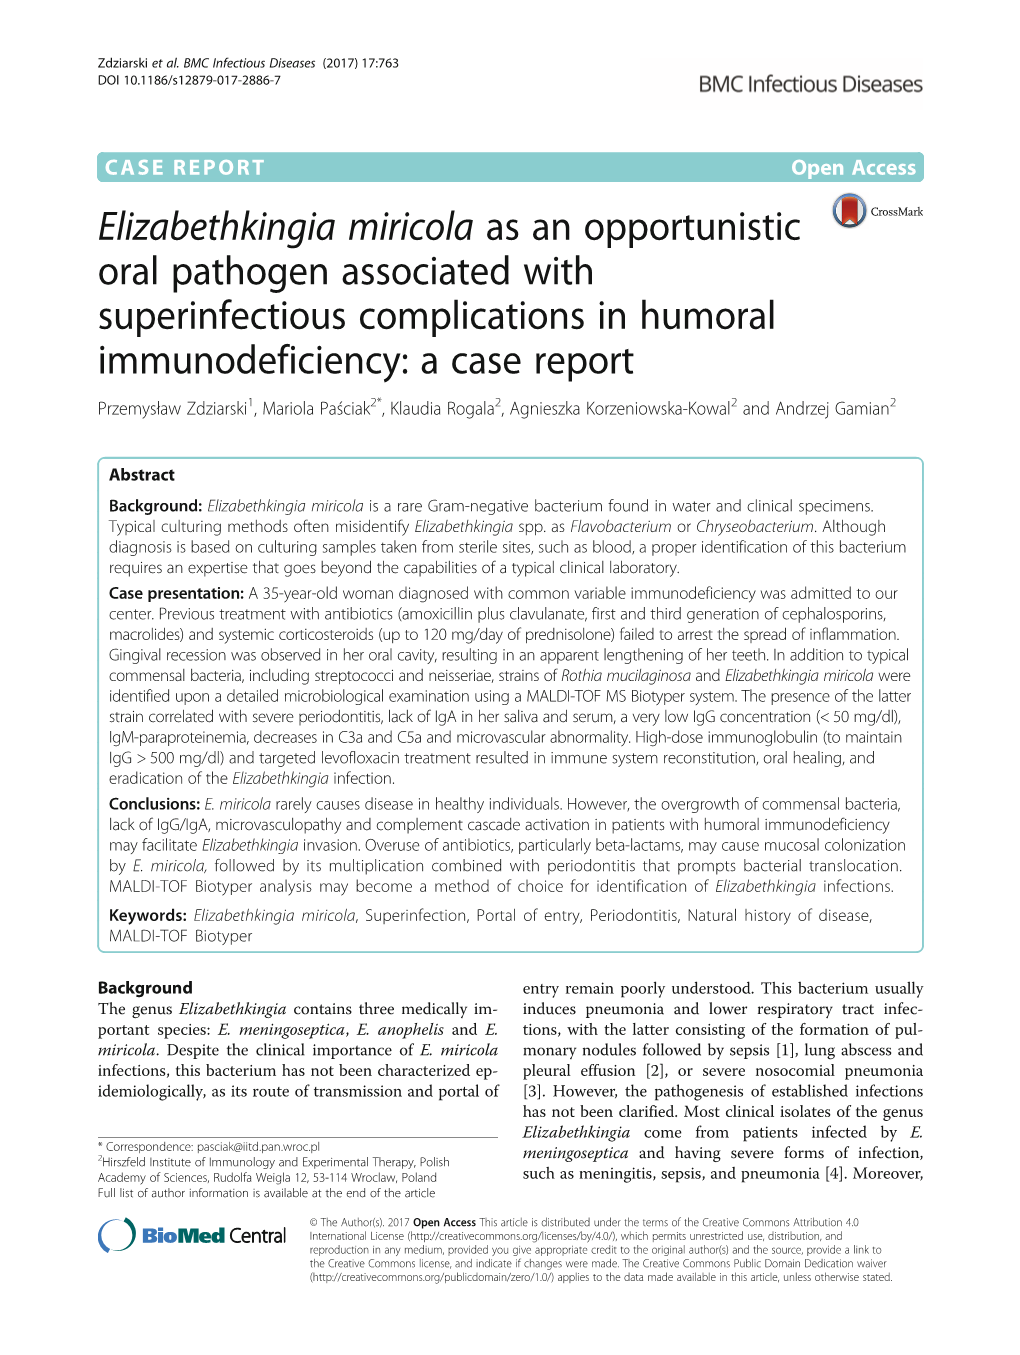 Elizabethkingia Miricola As an Opportunistic Oral Pathogen Associated with Superinfectious Complications in Humoral Immunodefici